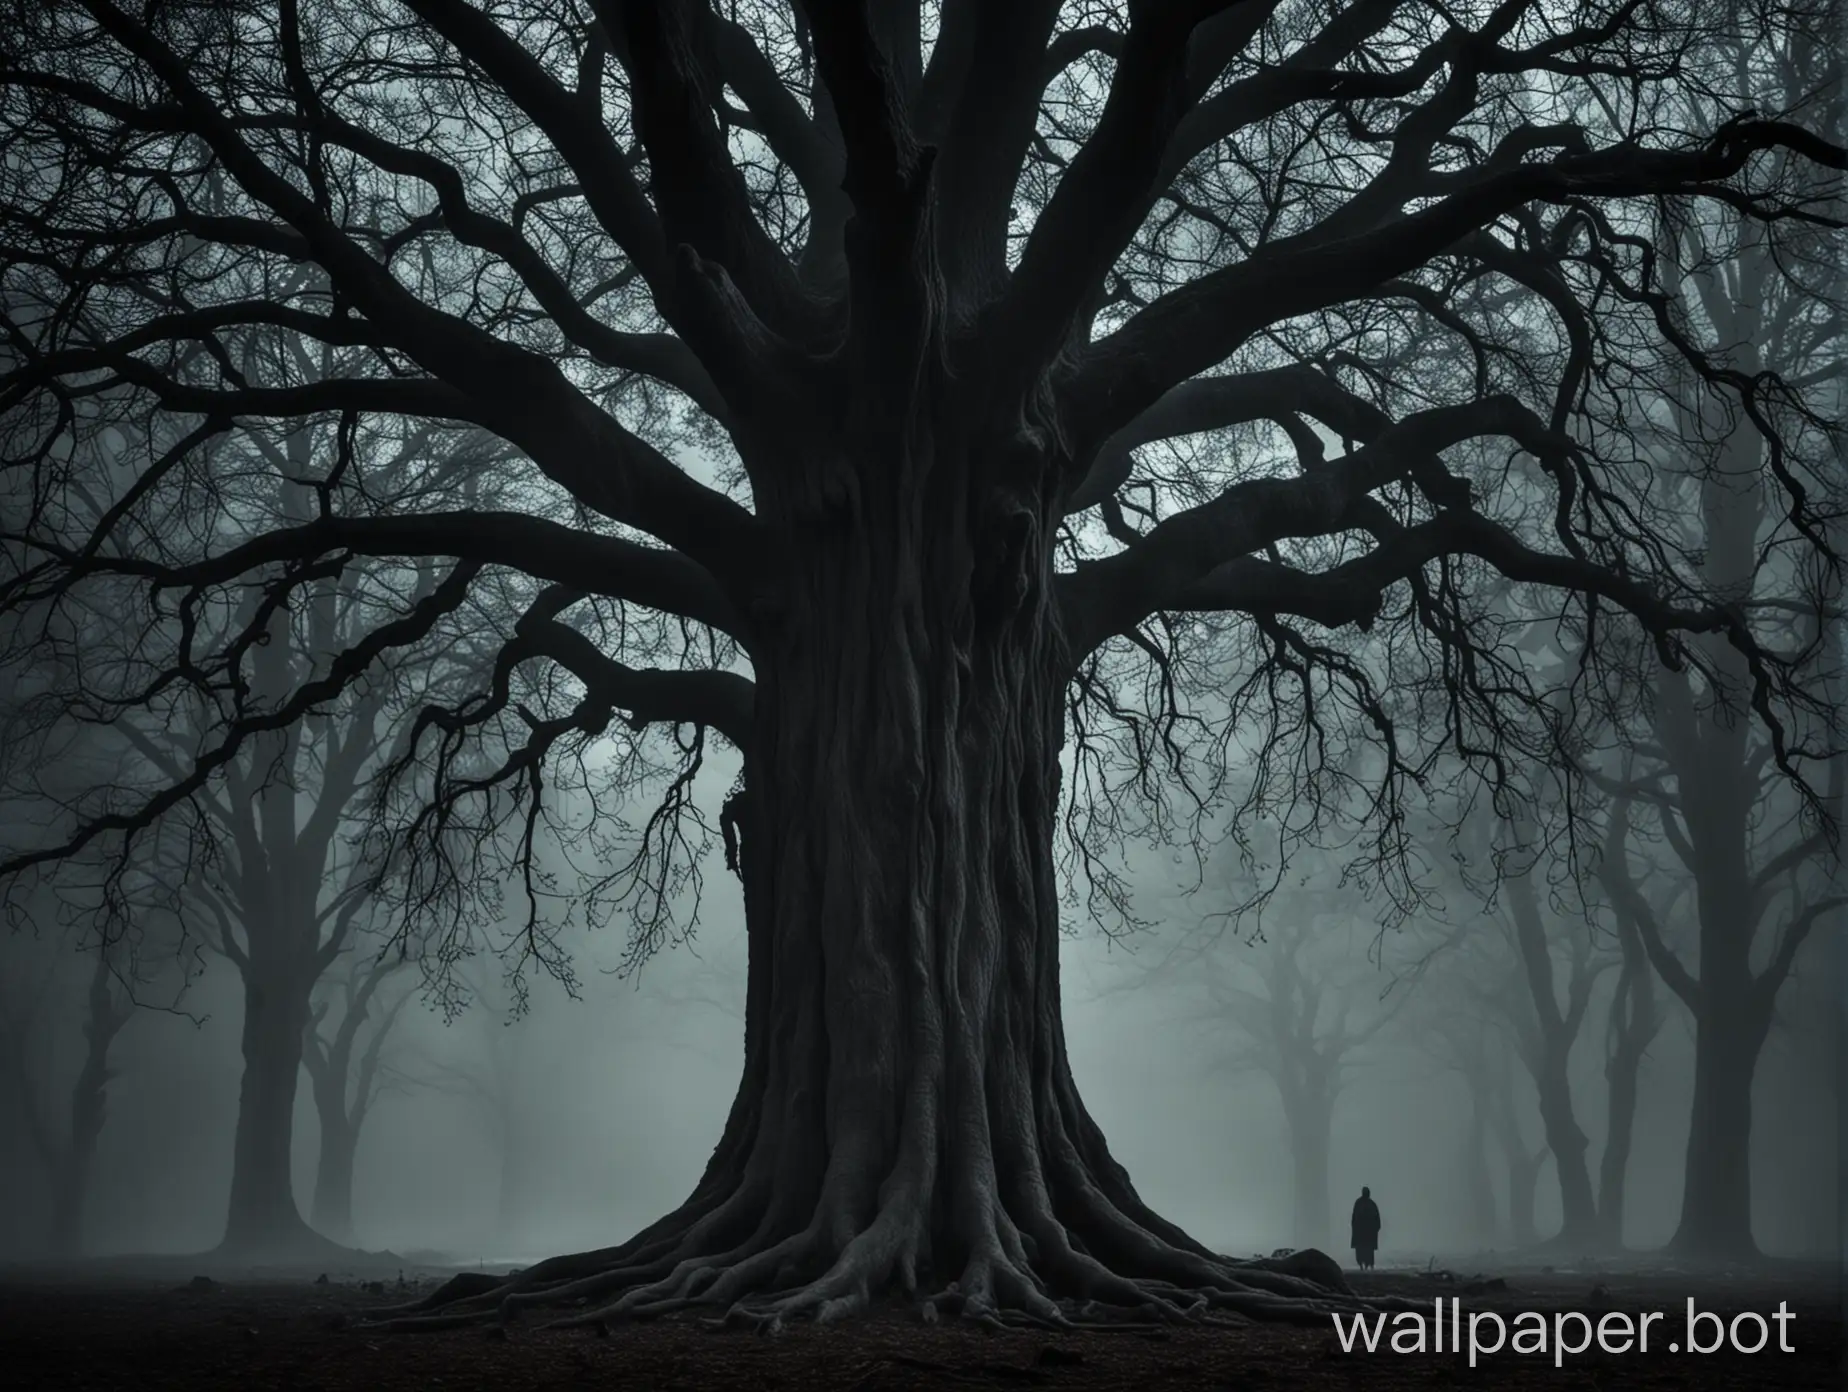 Eerie-Enchantment-Majestic-Tree-Amidst-Darkness-and-Jinn-Presence